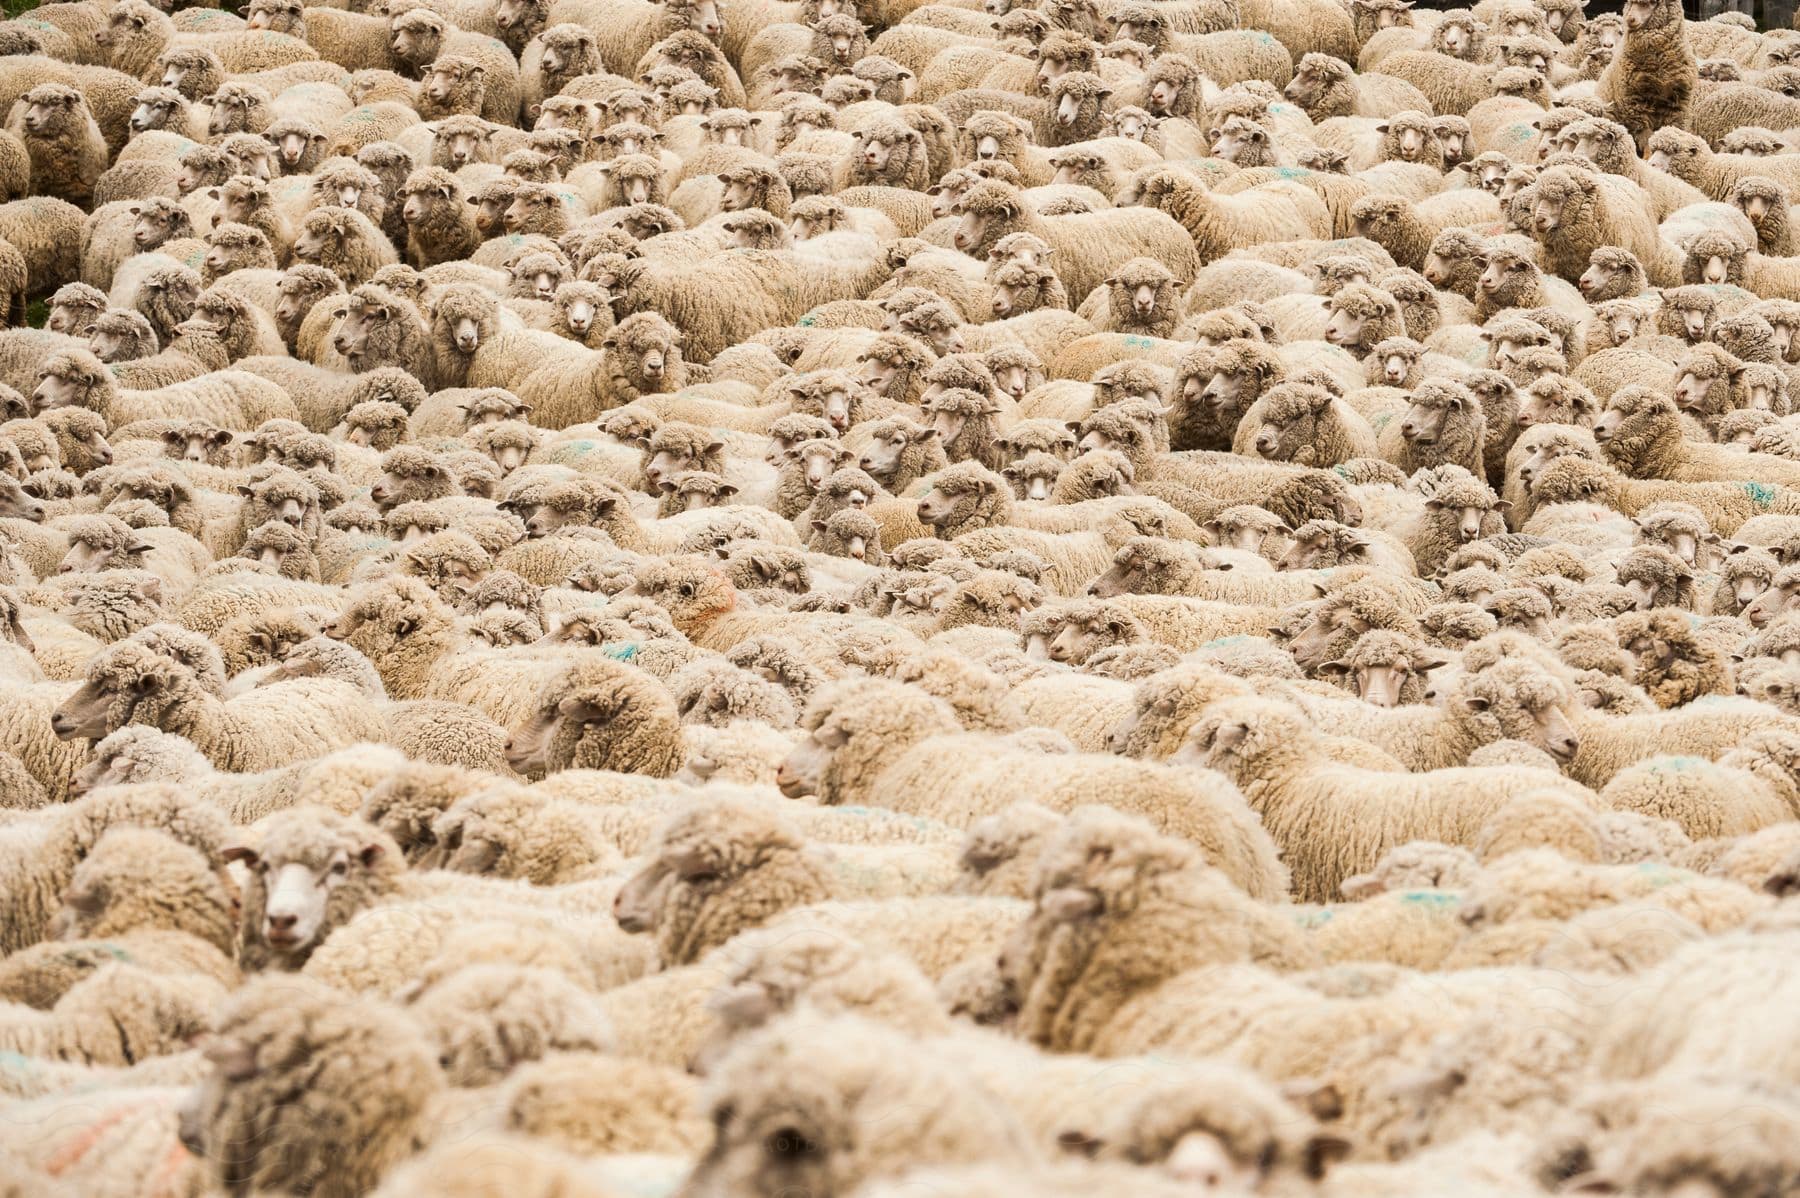 A field filled with hundreds of sheep in an outdoor setting during the day